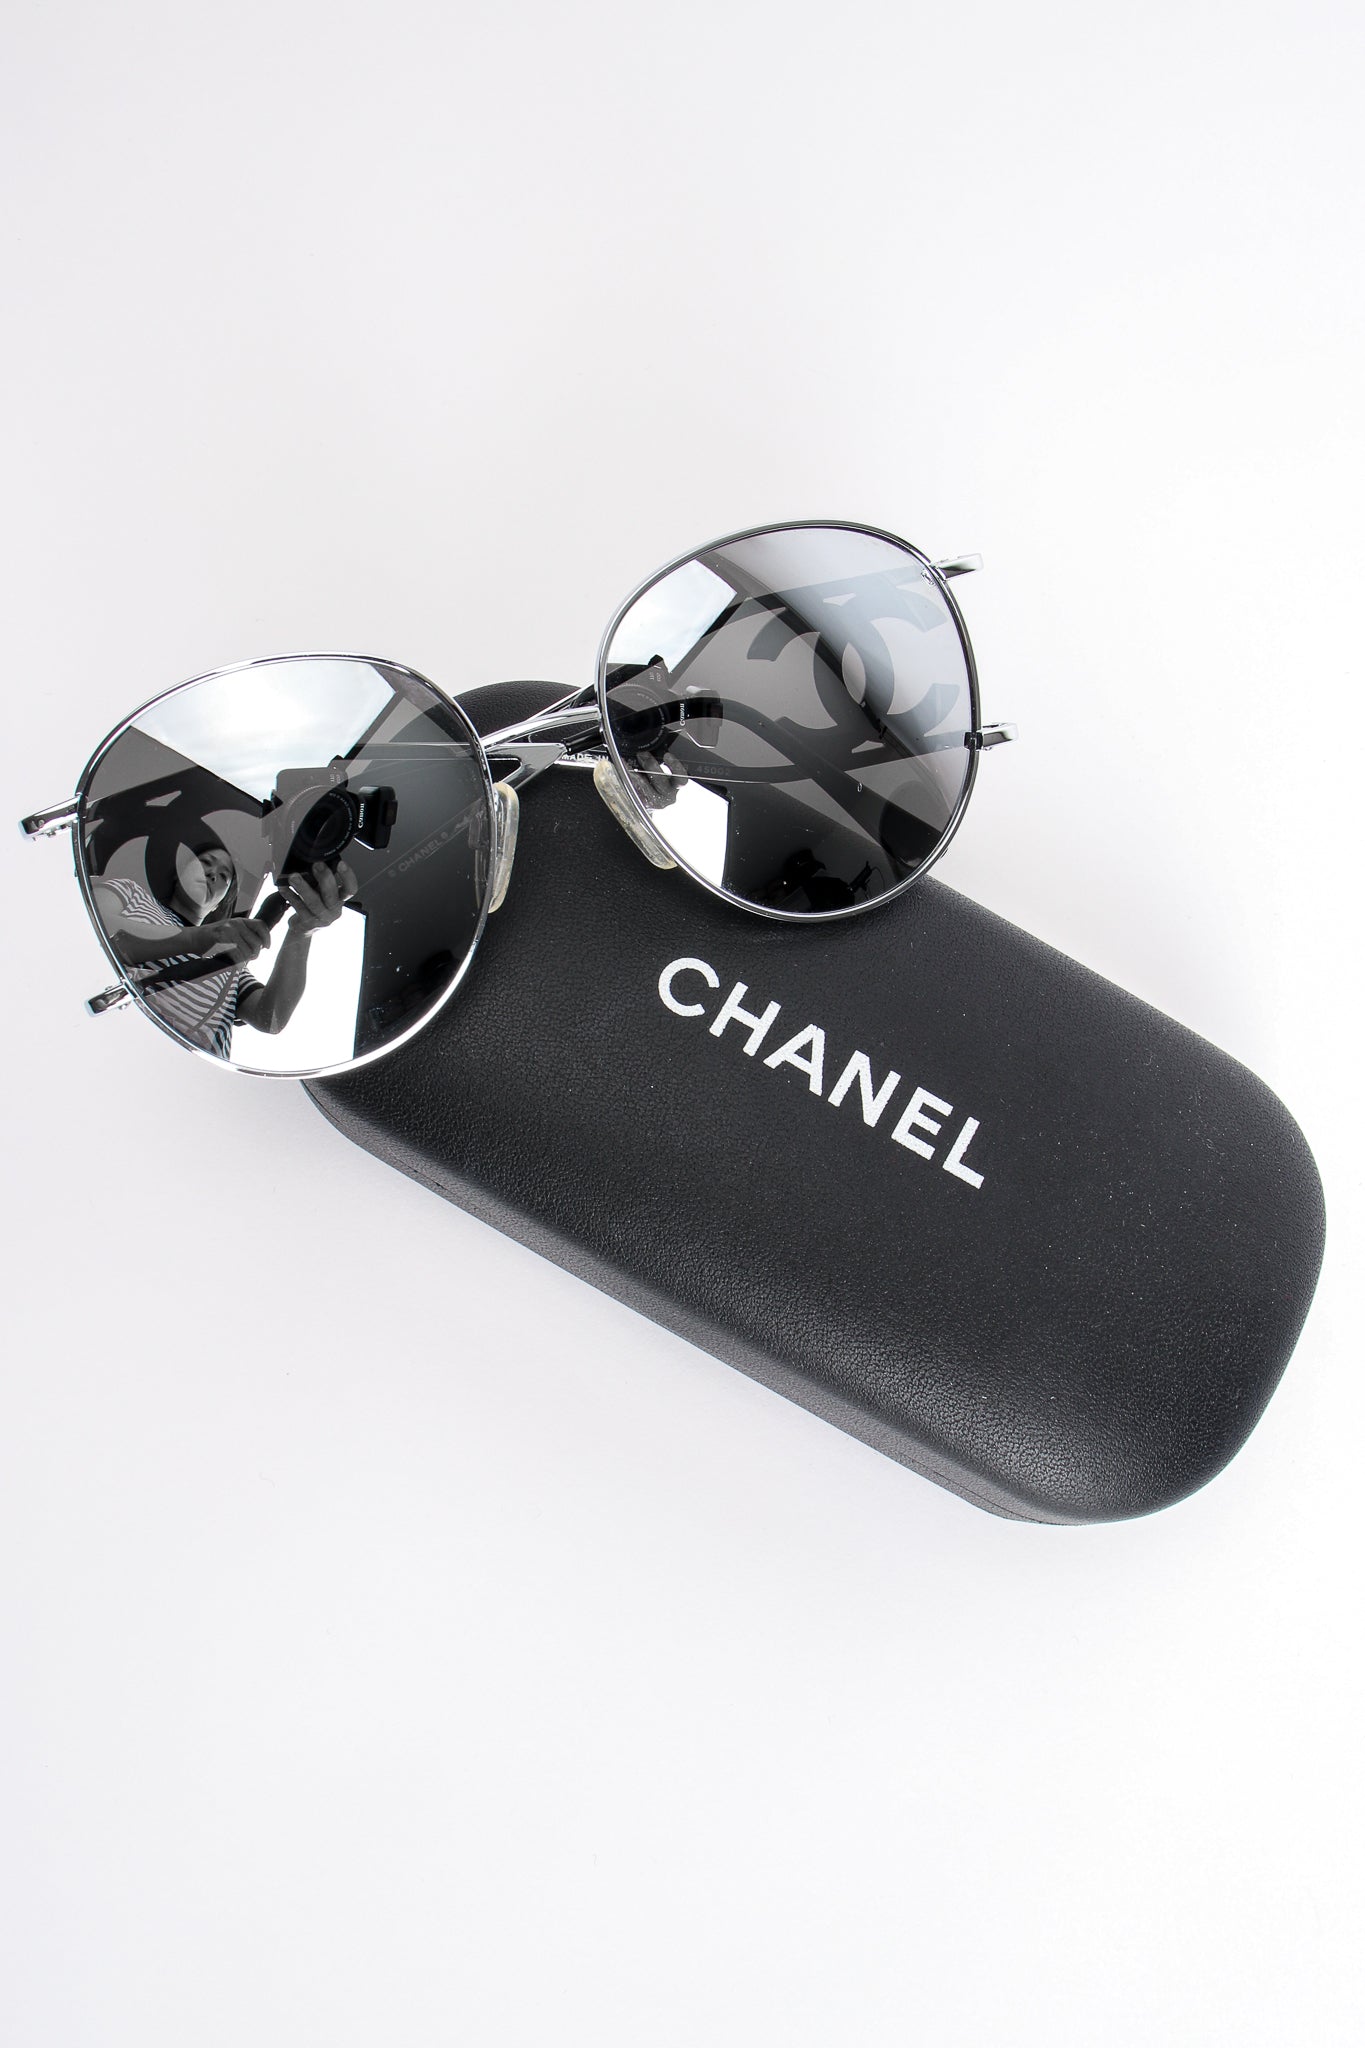 Vintage Chanel 1990s Miller Silver Mirror CC Sunglasses with case at Recess Los Angeles